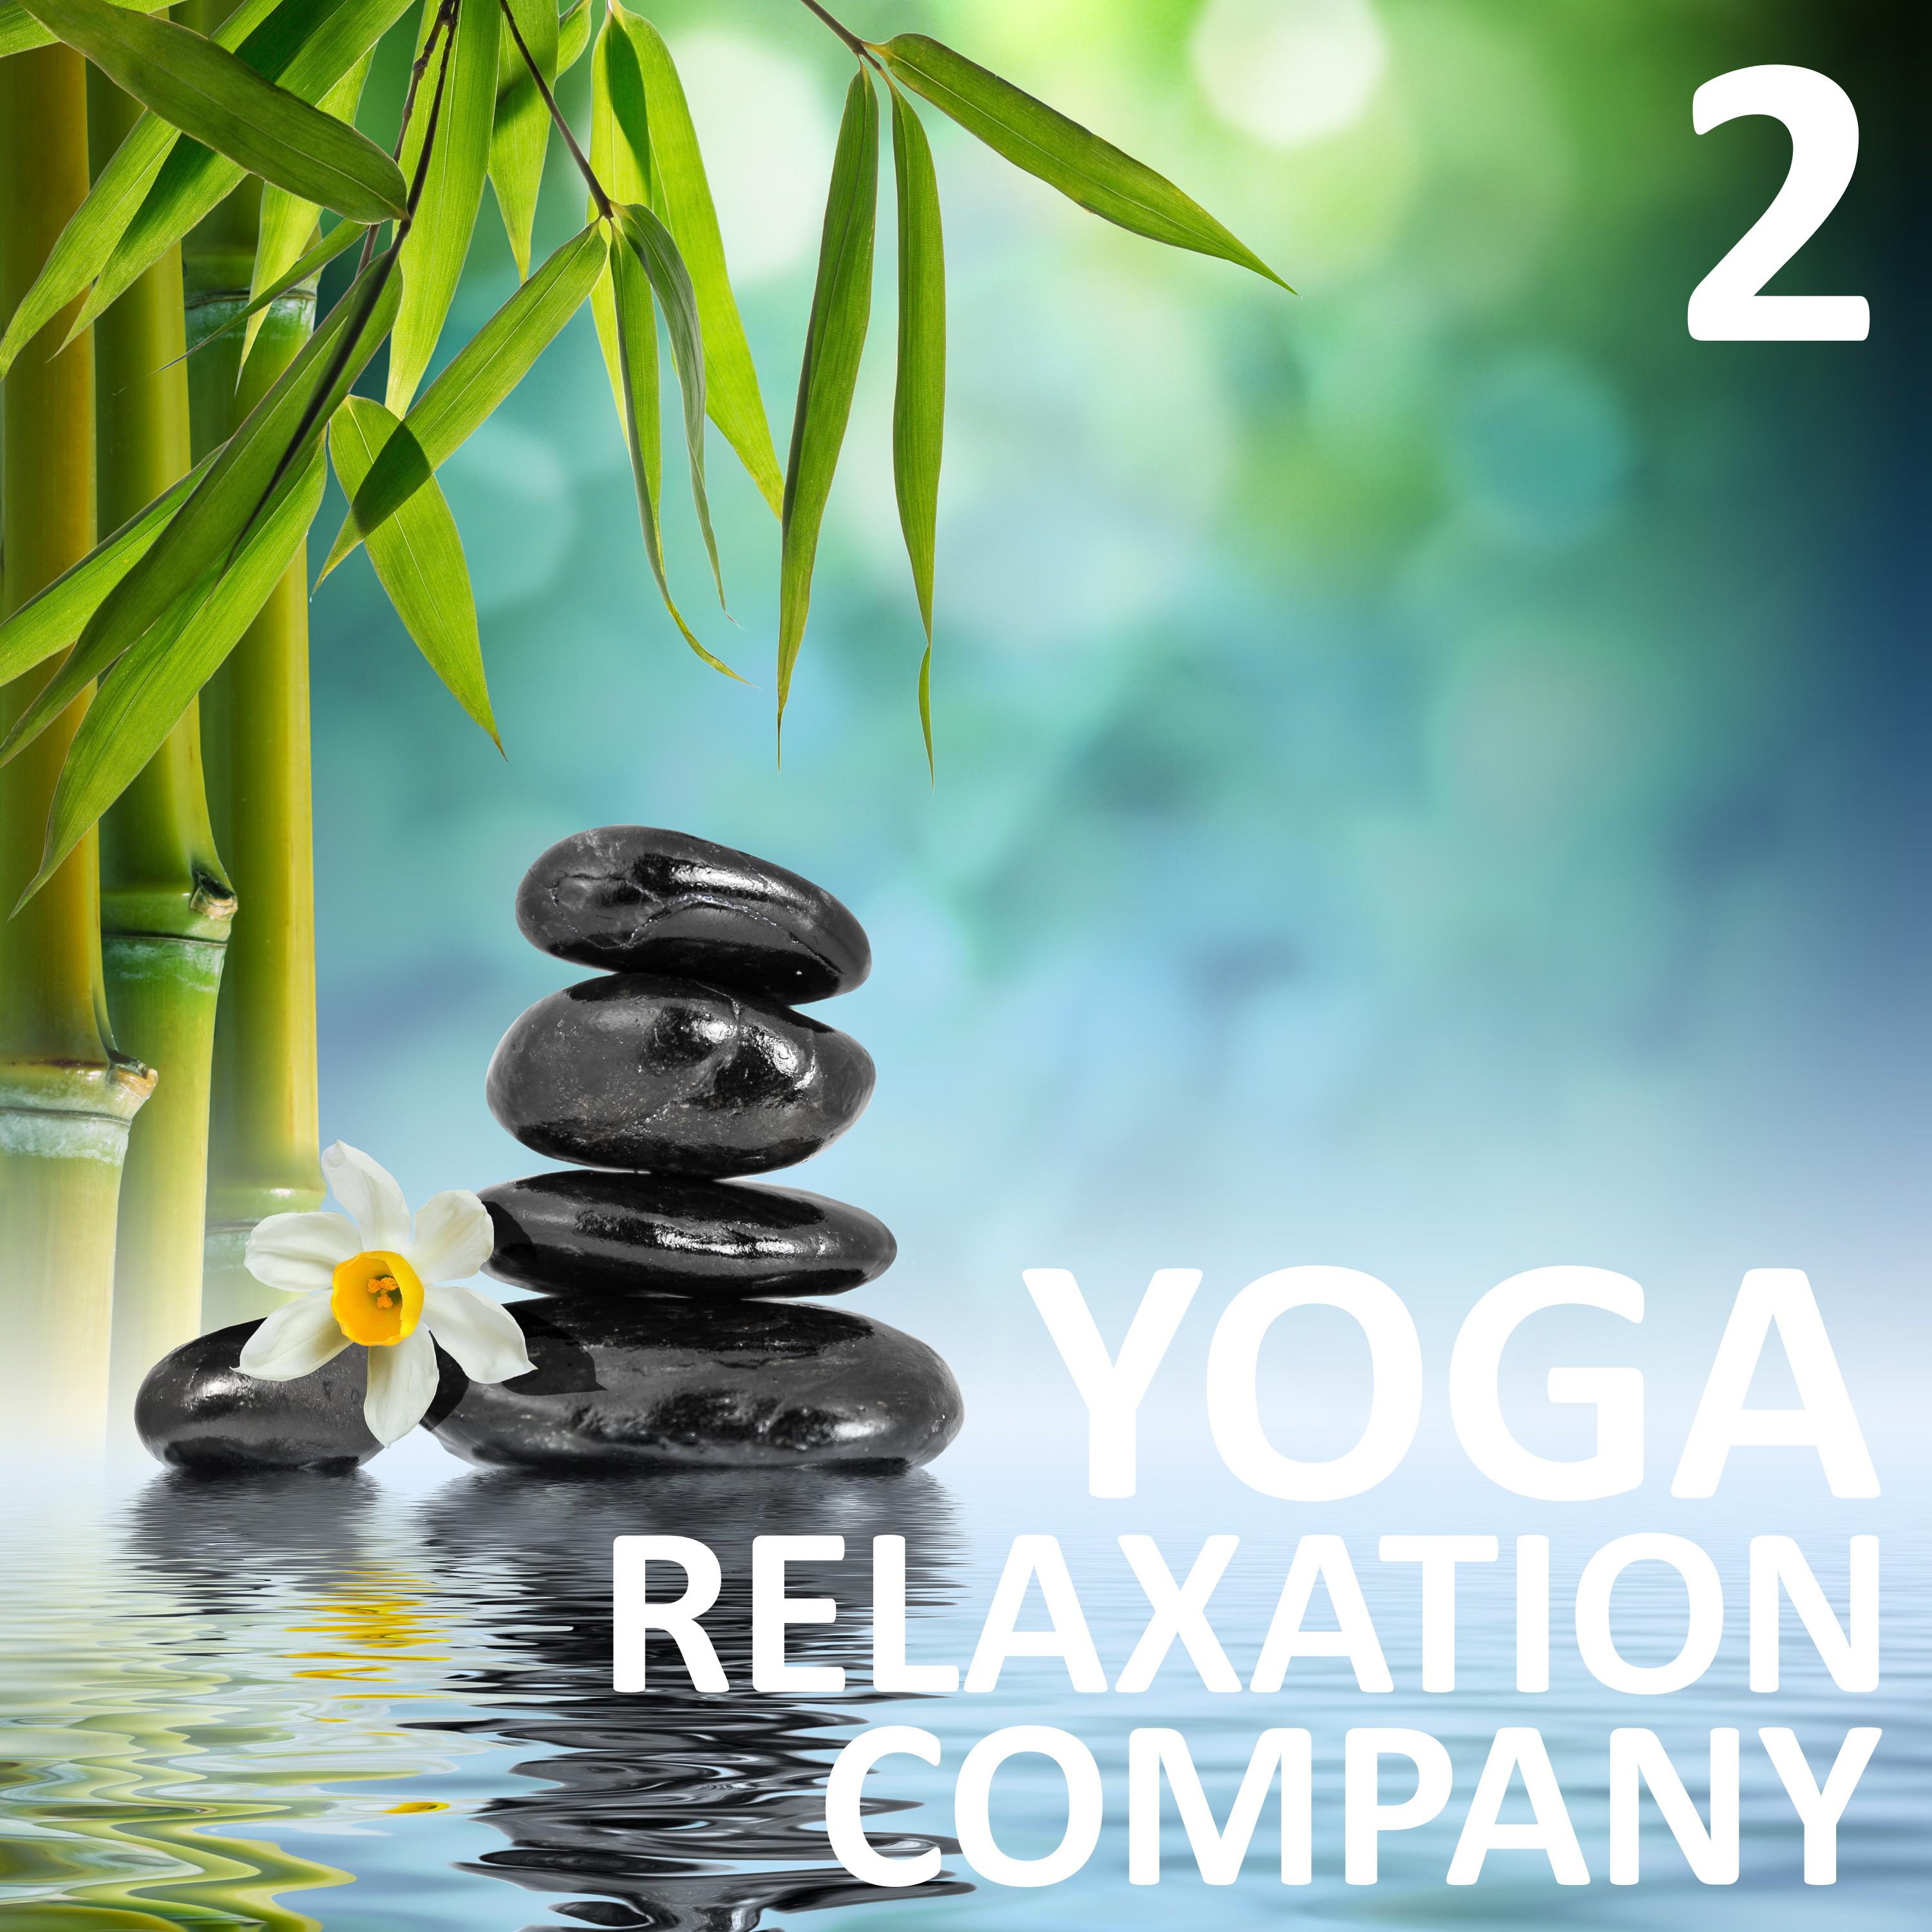 Yoga Relaxation Company - During Our Practice